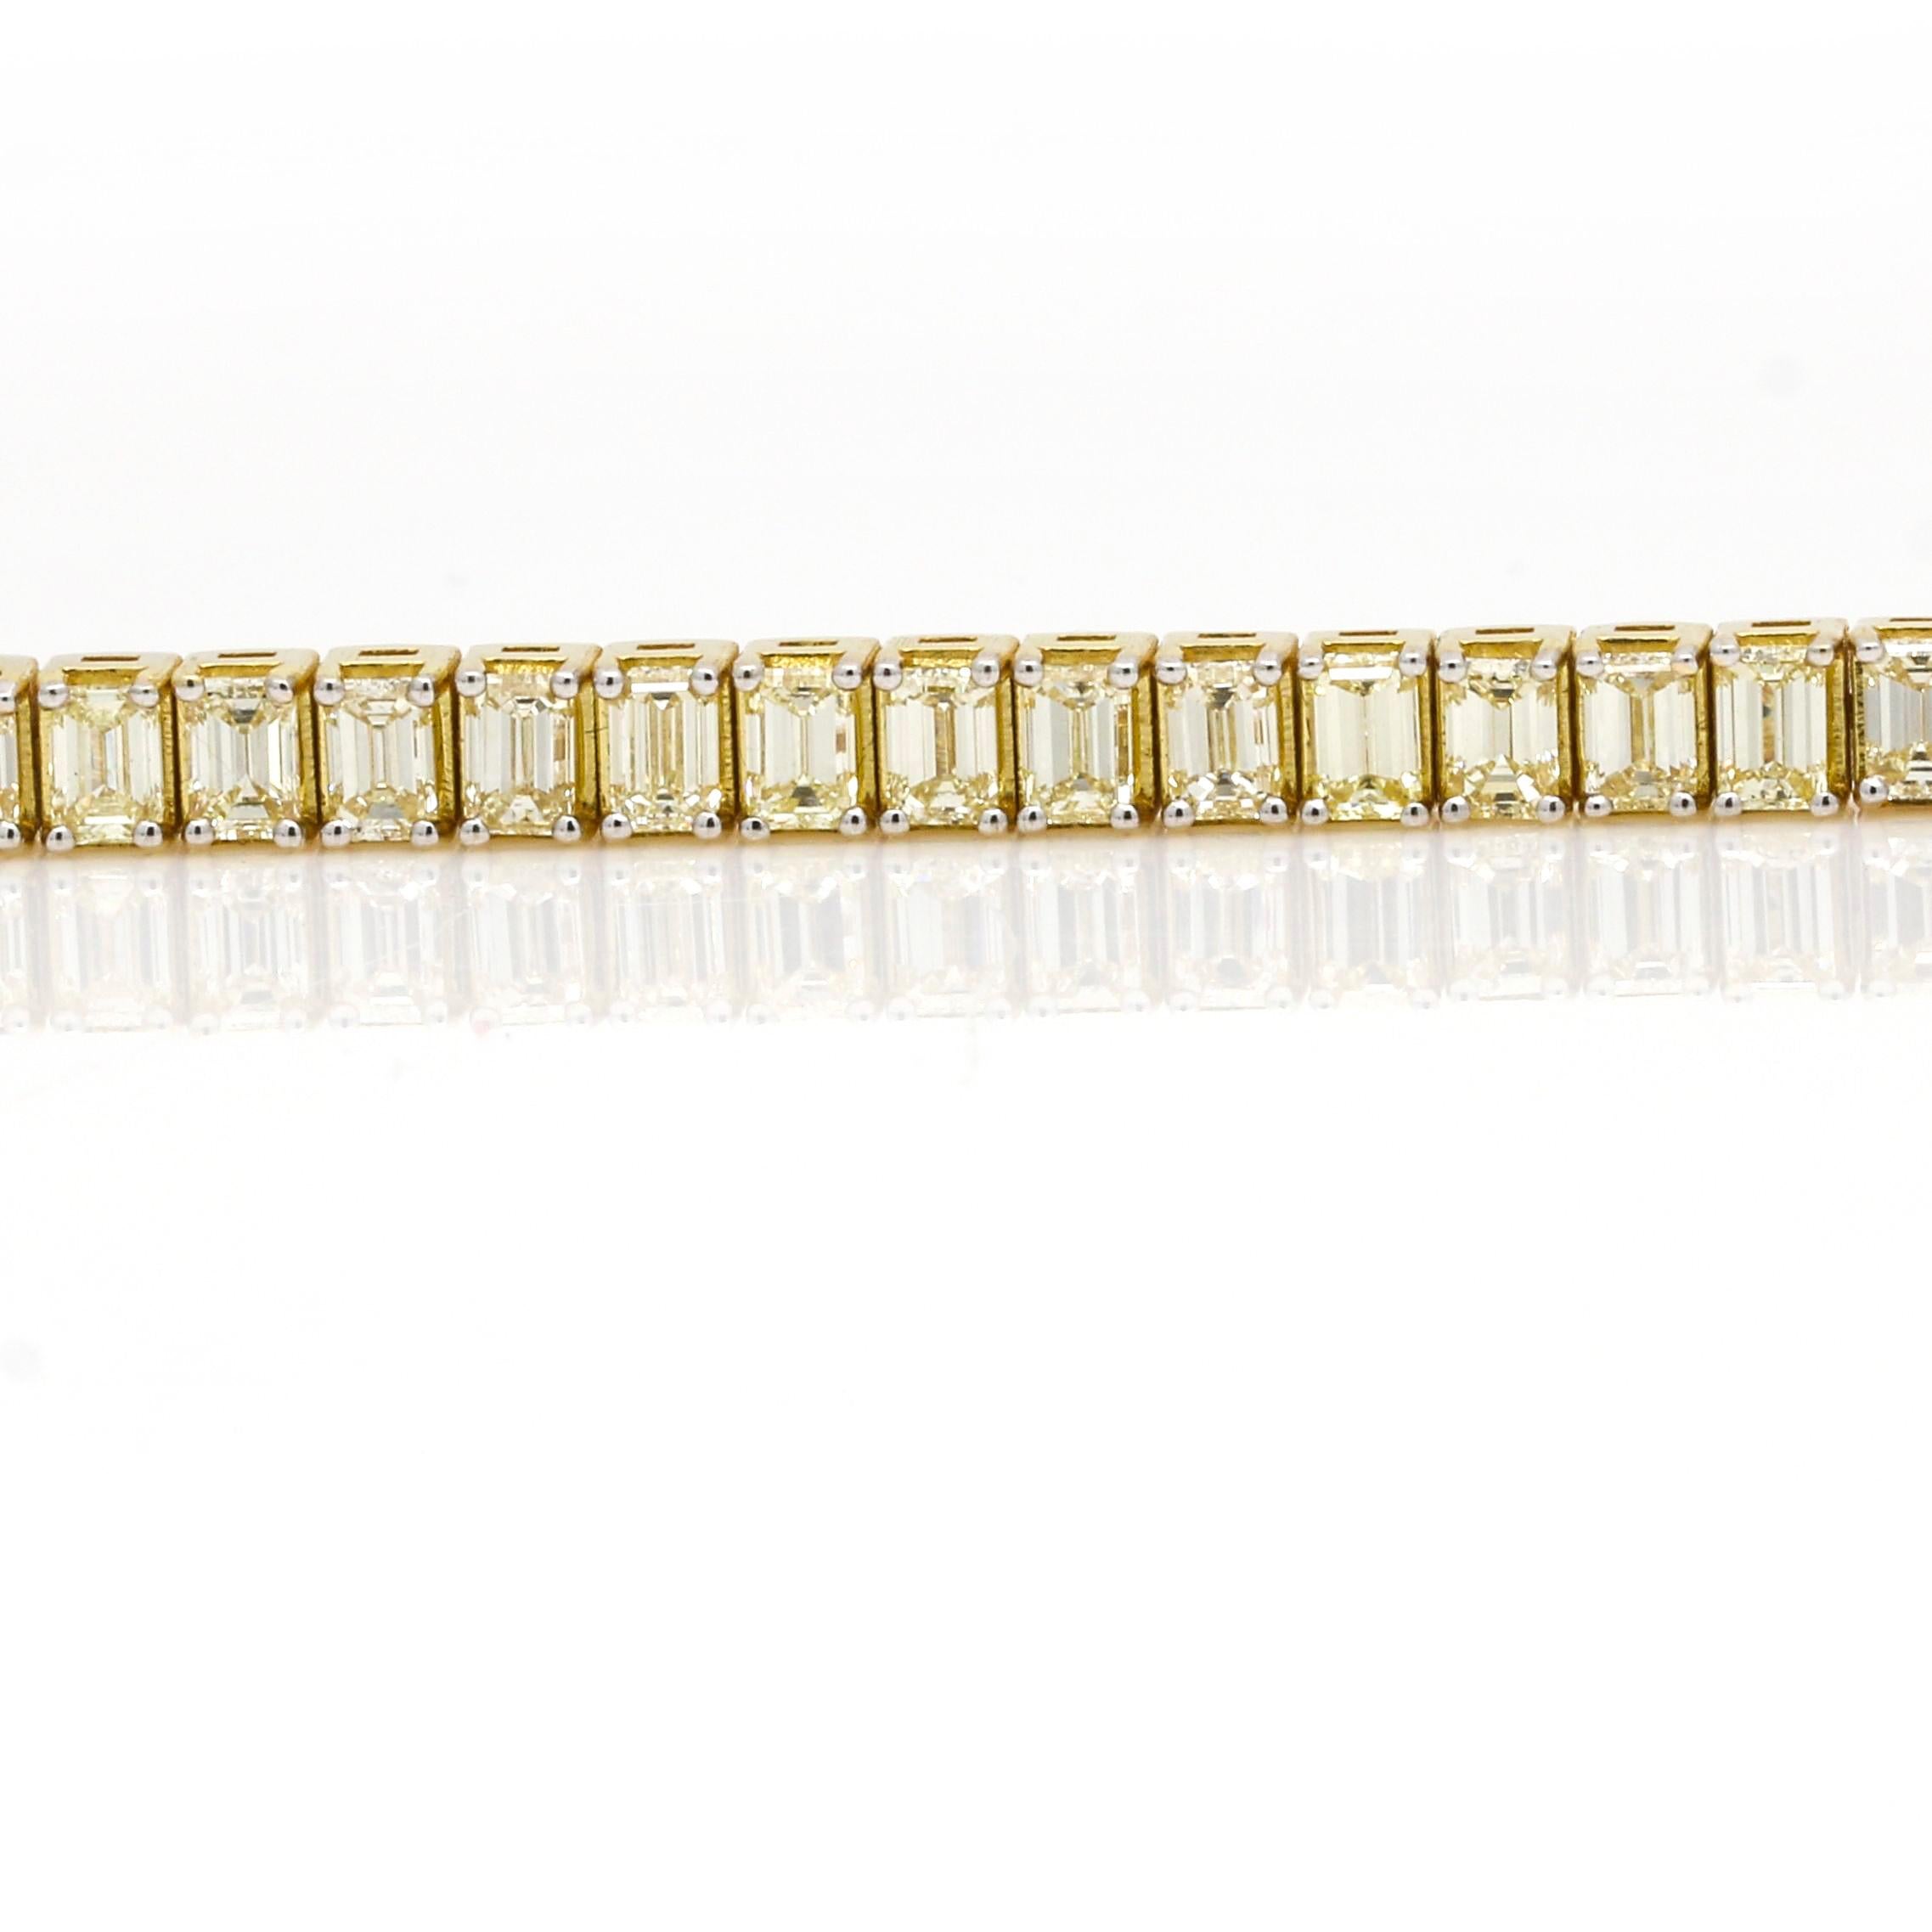 Contemporary Woman's Emerald-Cut Diamond Tennis Bracelet in 14k Yellow Gold 8.97 Cttw For Sale